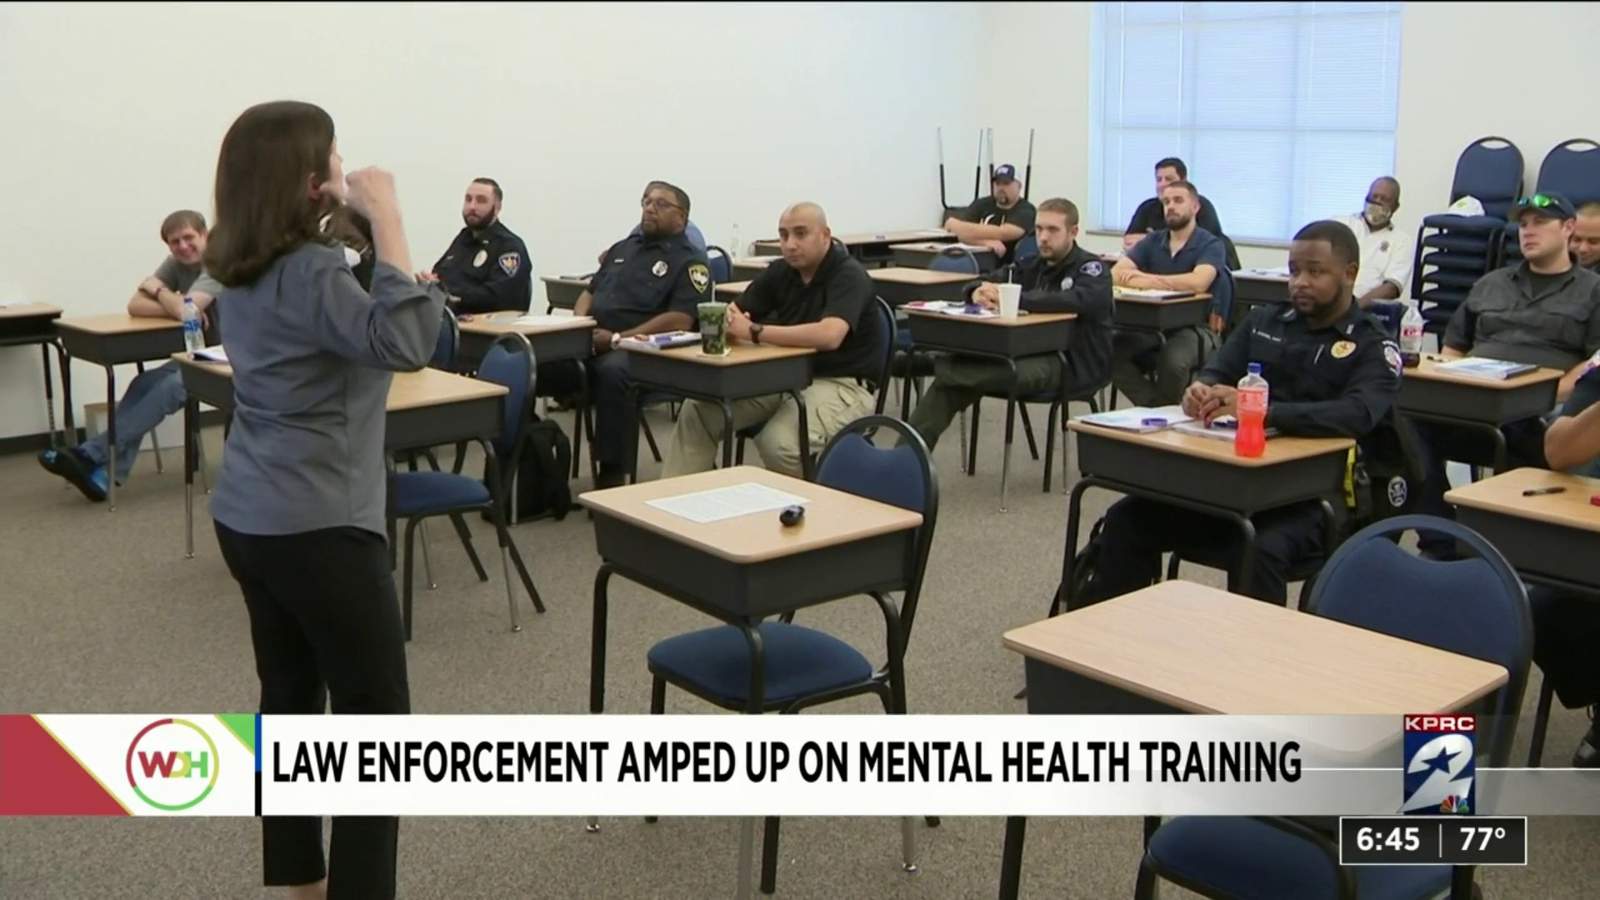 Autism training for police officers: Getting to know each other better